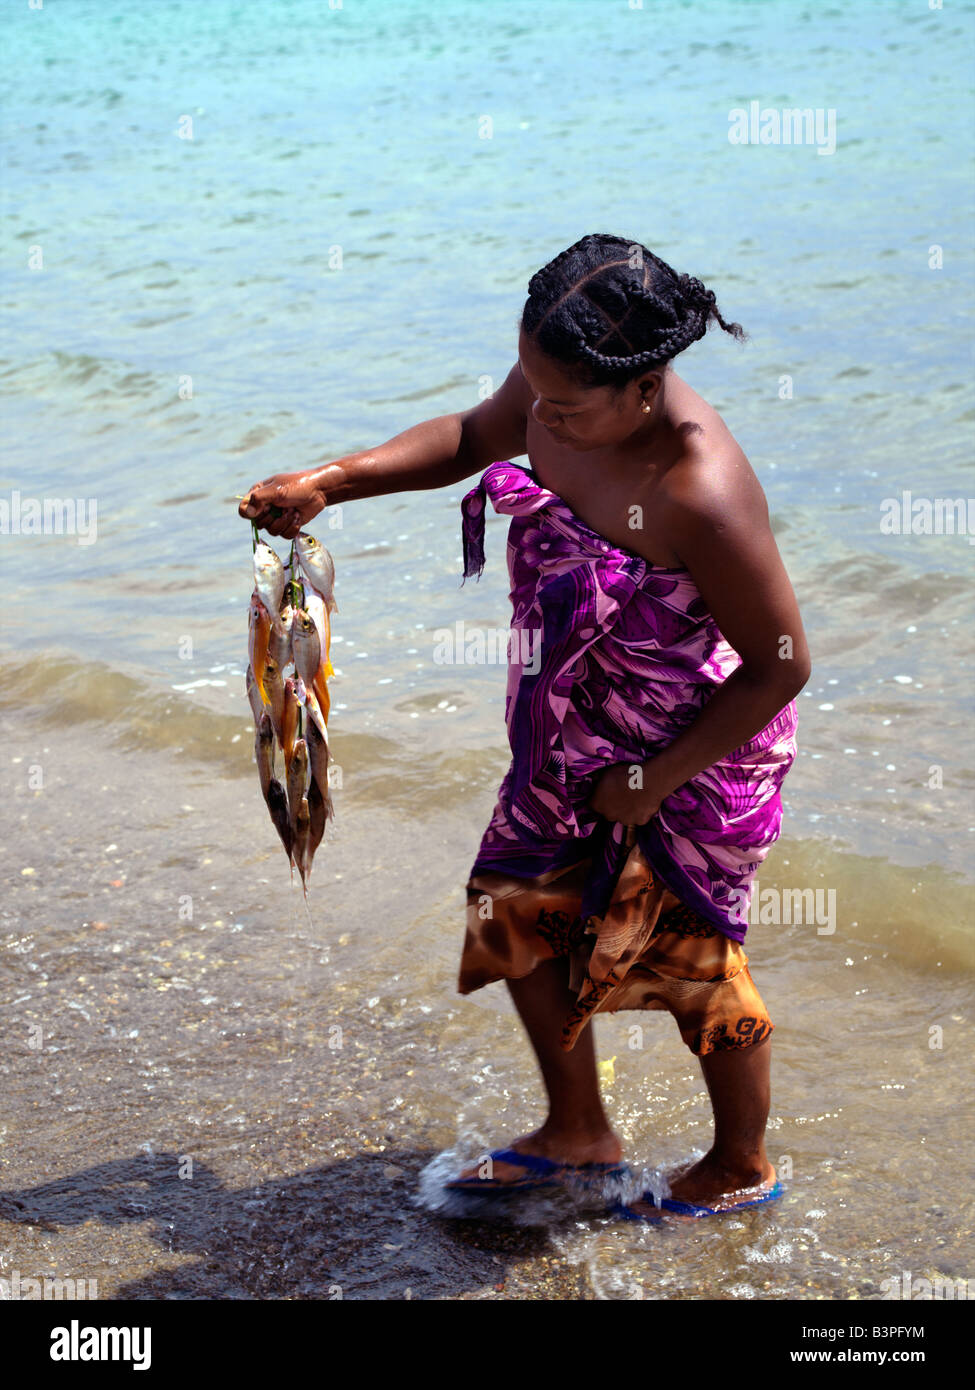 Northern Madagascar, Washing the day's catch! A Malagasy woman with fish she has bought from fishermen in a fishing village just outside Antsiranana, more commonly known as Diego after the Portuguese captain, Diego Suarez, who sailed there in 1543. Antsiranana means 'port' in the Malagasy language.Diego's deep-water harbour encircled by hills is of strategic importance to Madagascar. Stock Photo